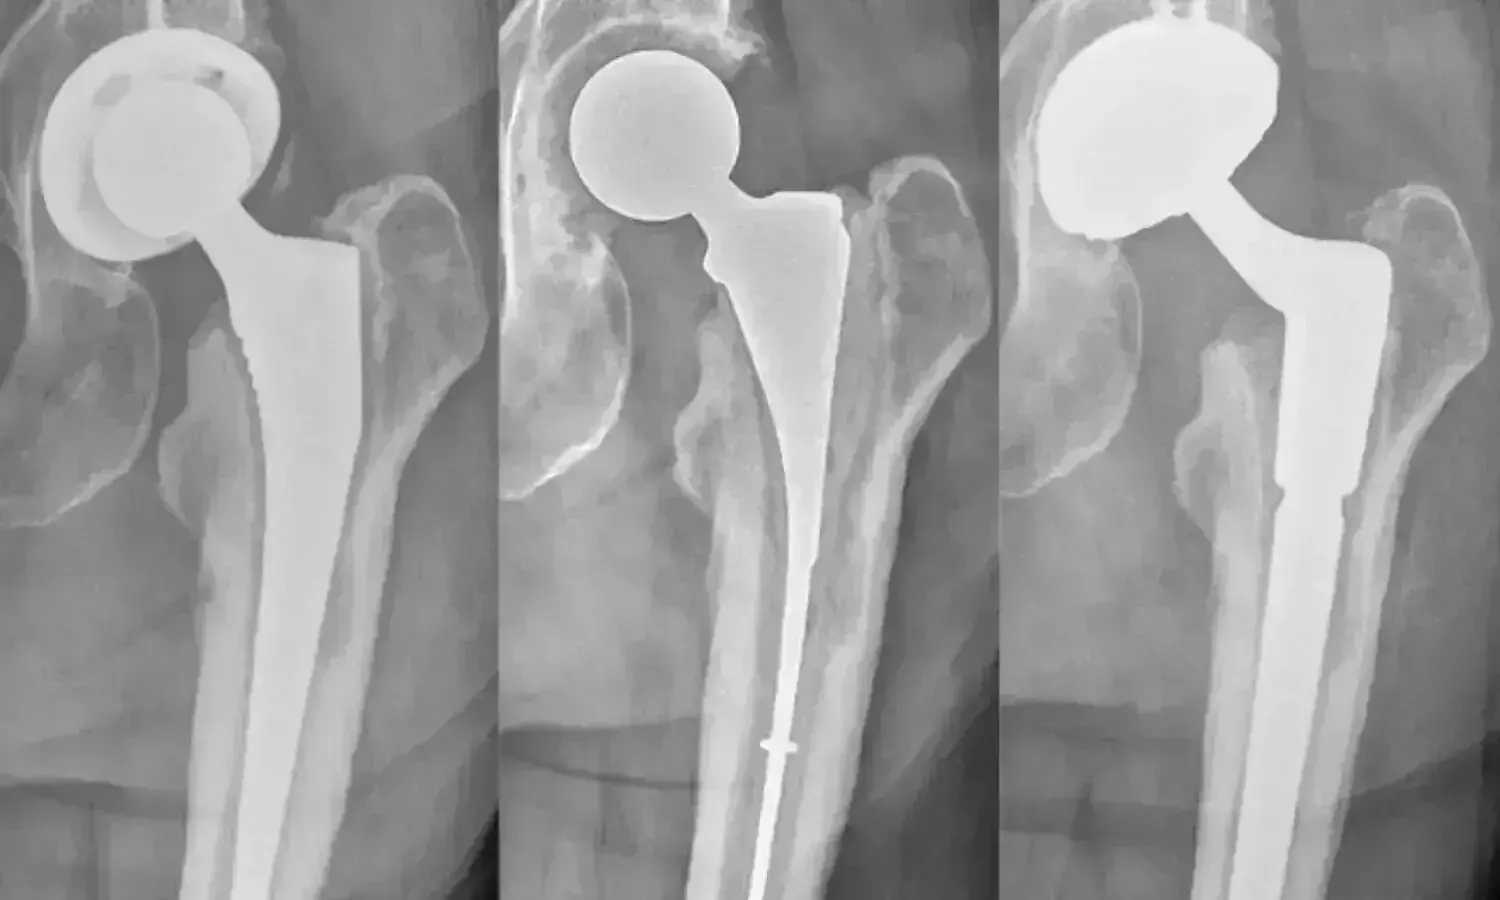 Perioperative periprosthetic joint infection prevention in total hip and knee replacement: European consensus